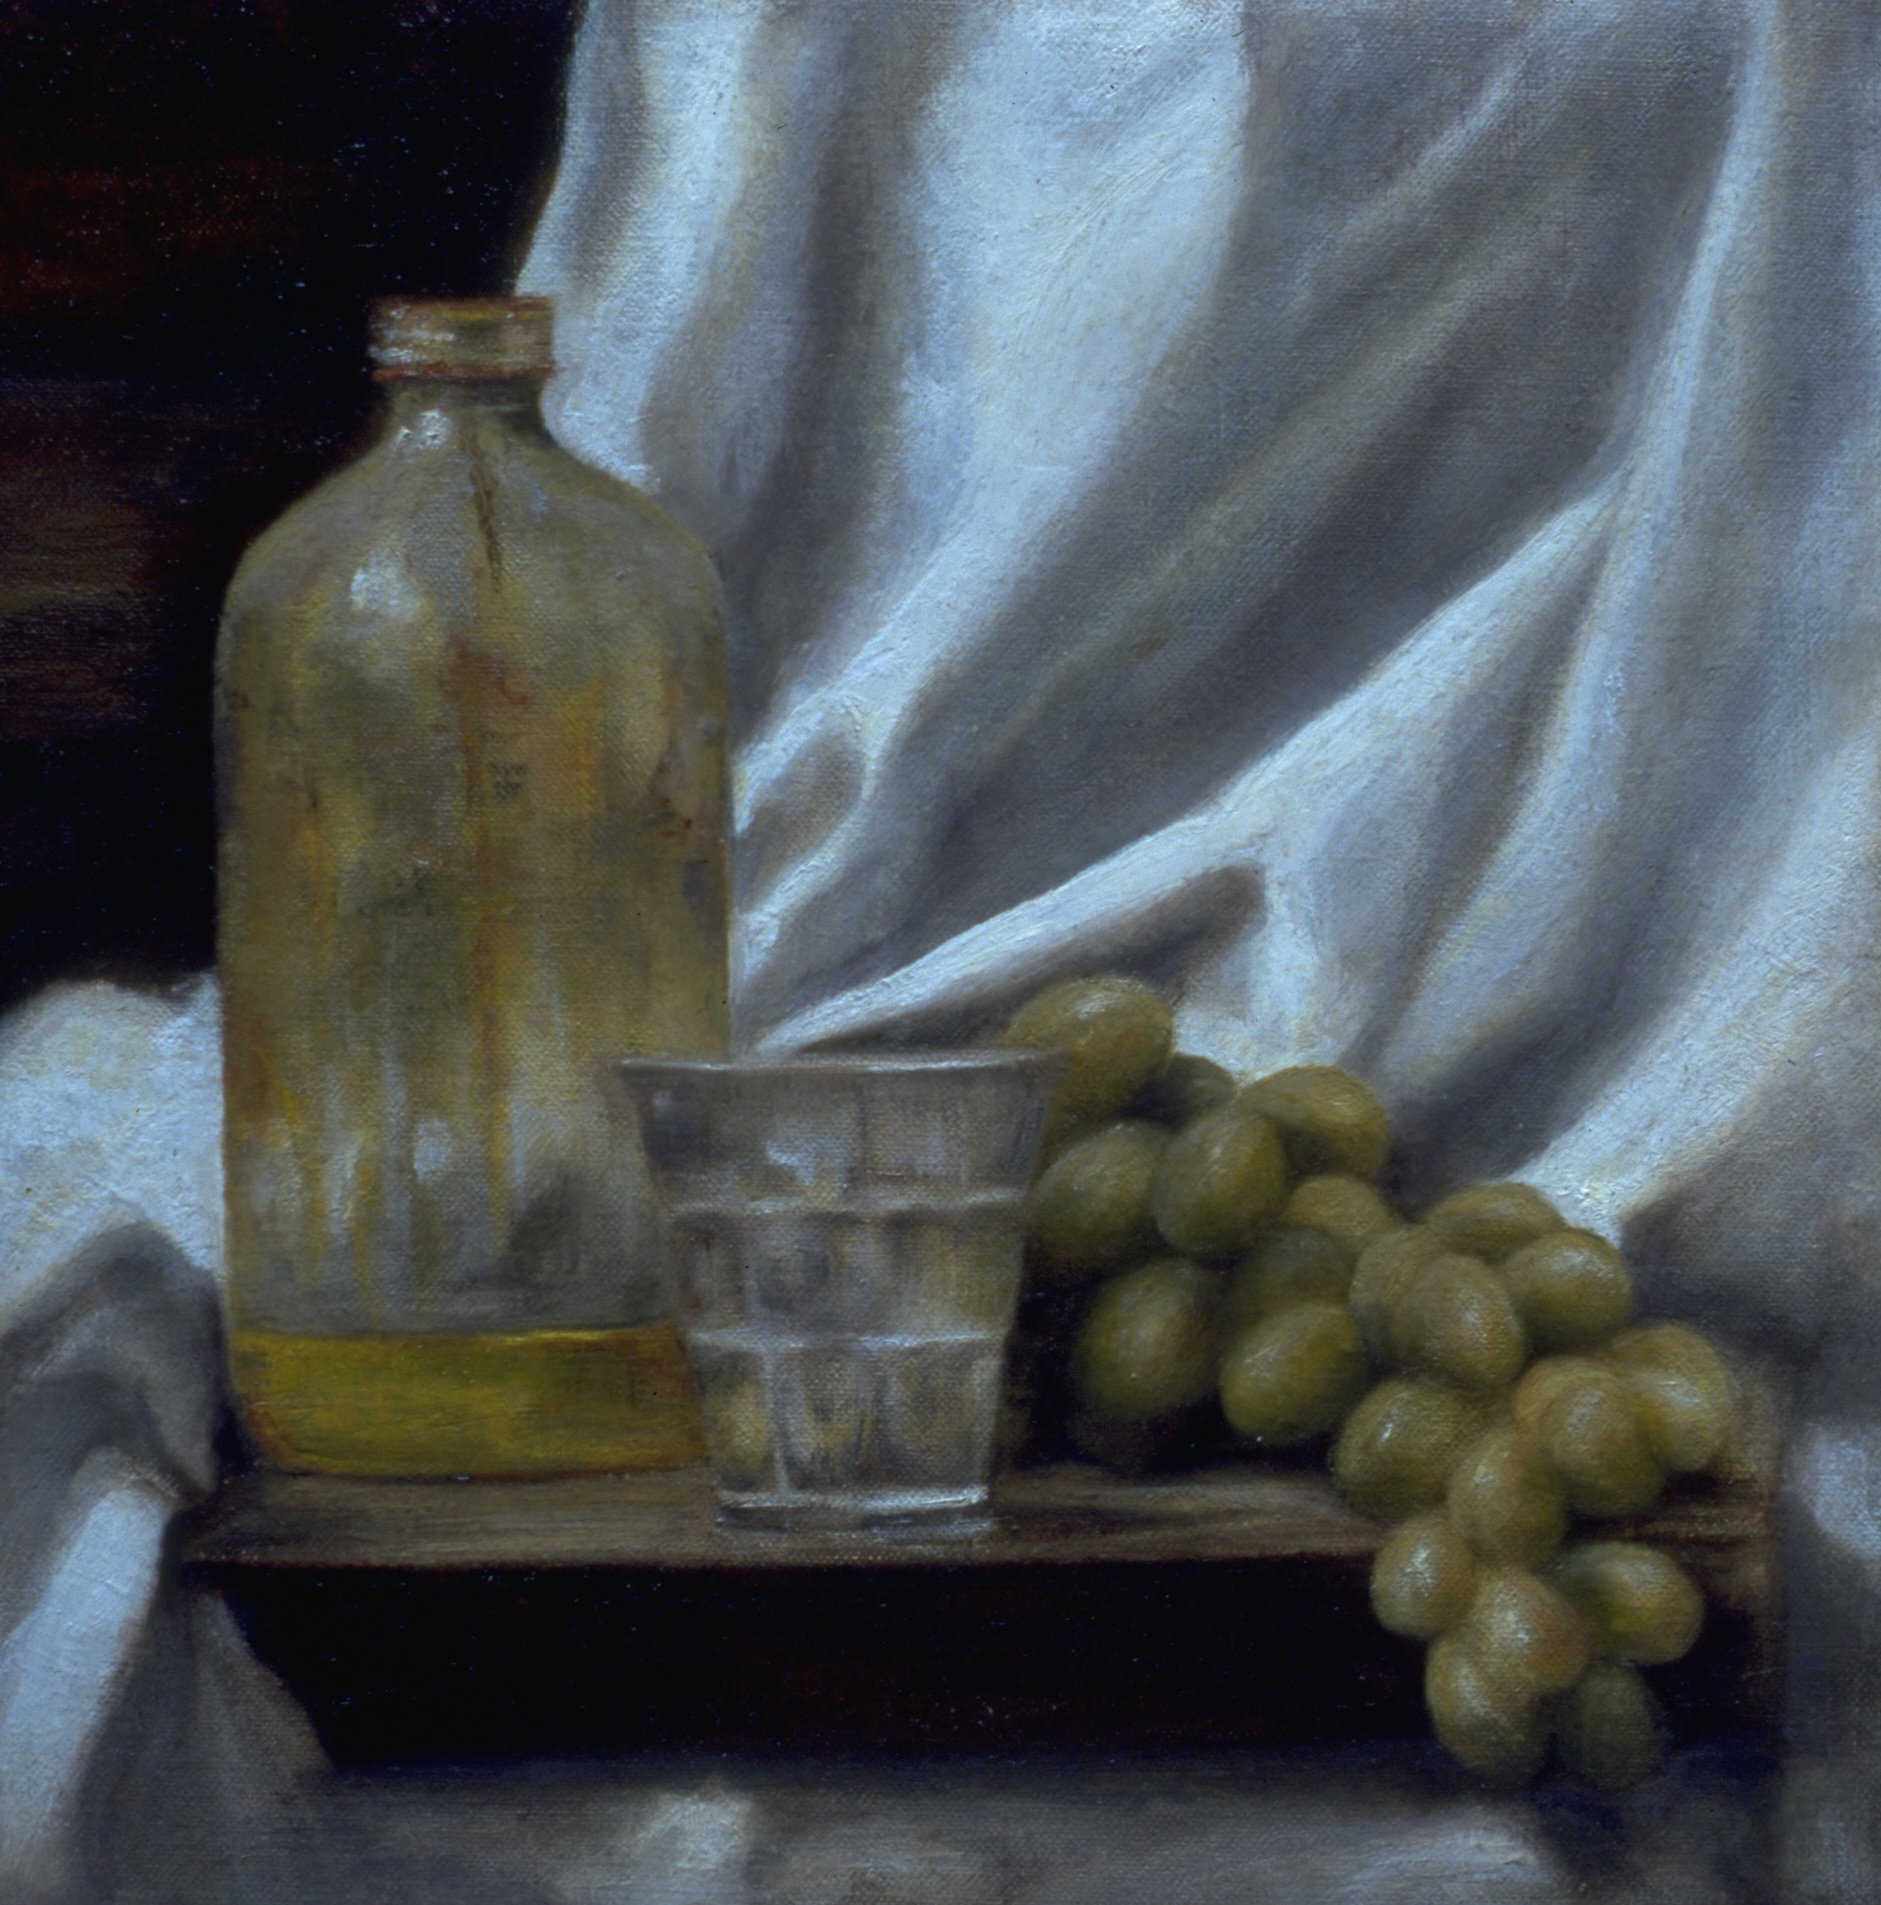 Oil, Water and Grapes